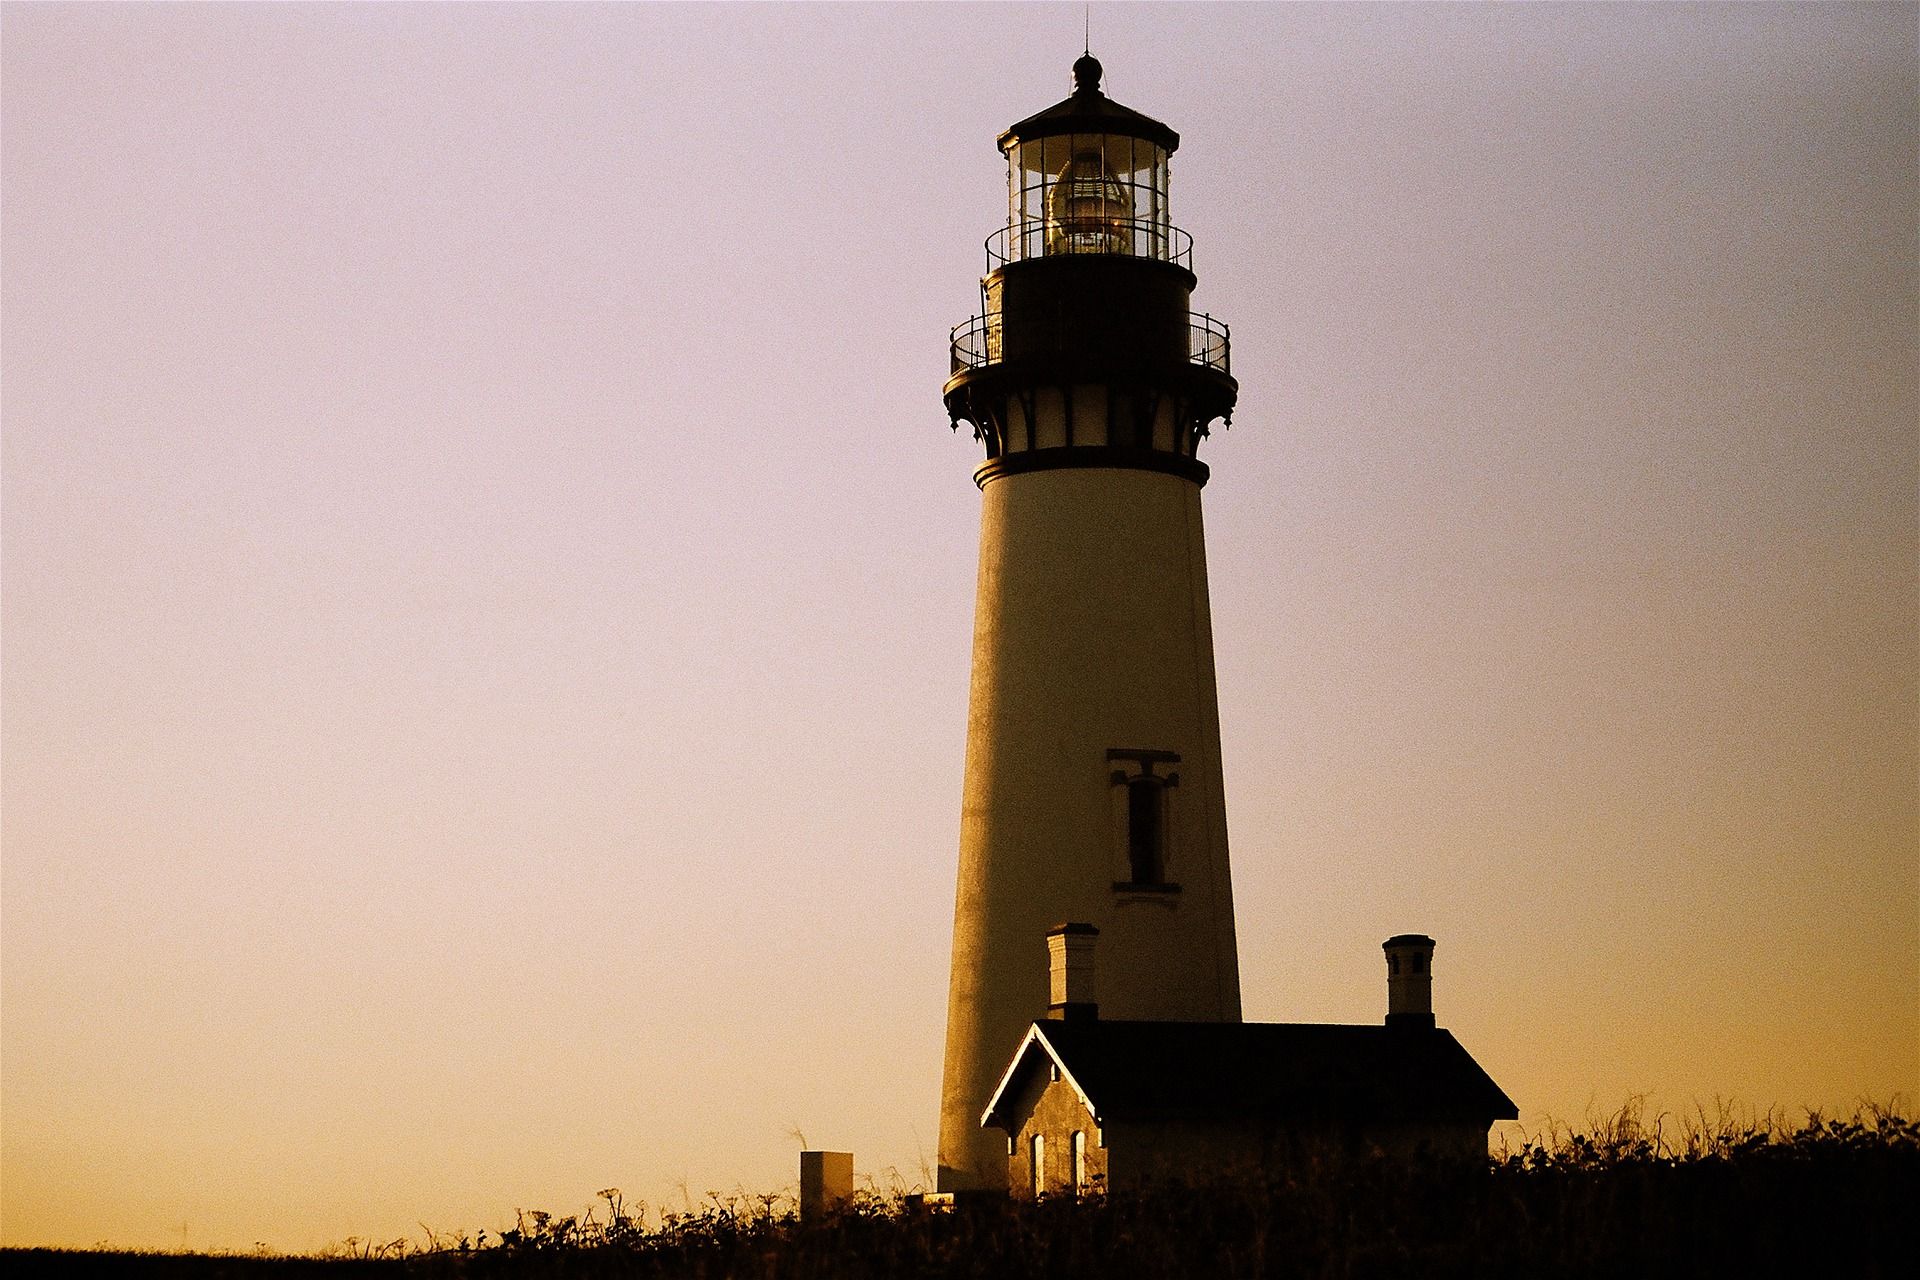 Sunset picture of Yaquina the Head Lighthouse in Newport